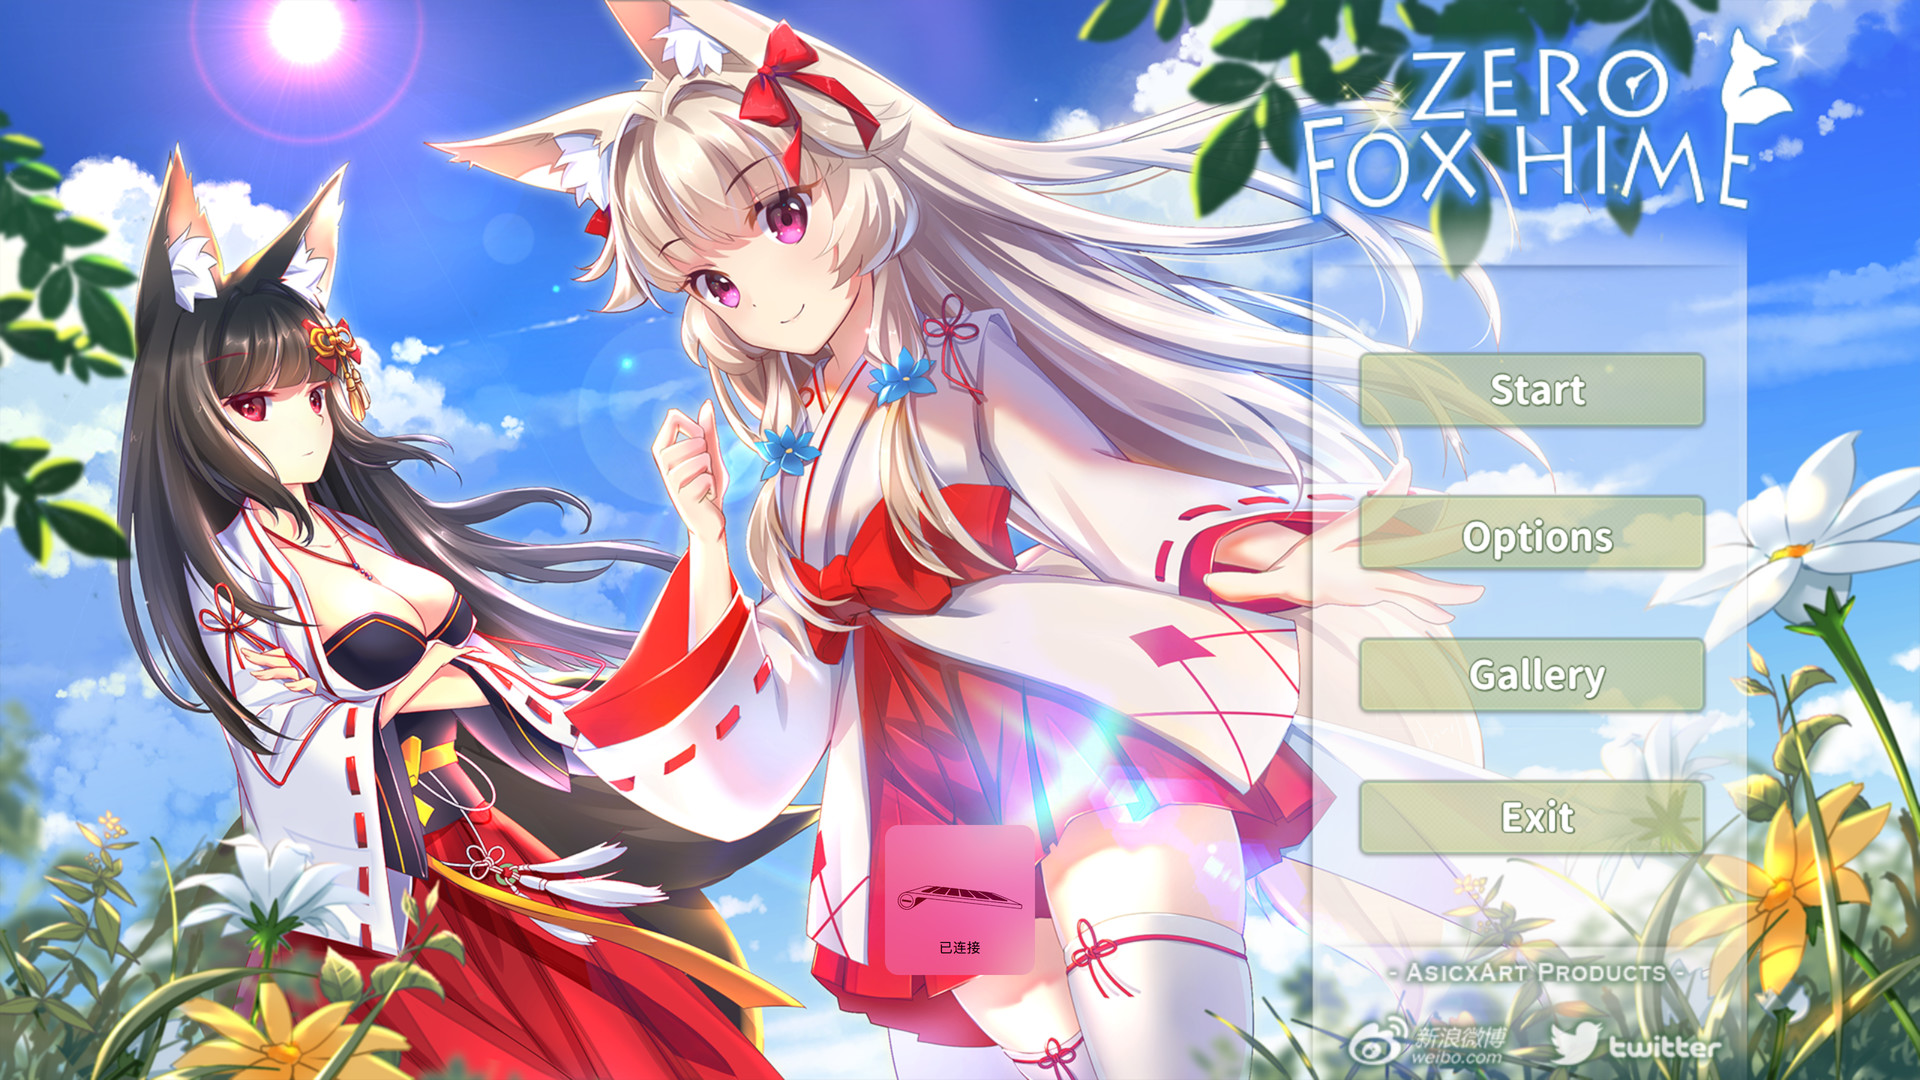 Find the best computers for Fox Hime Zero